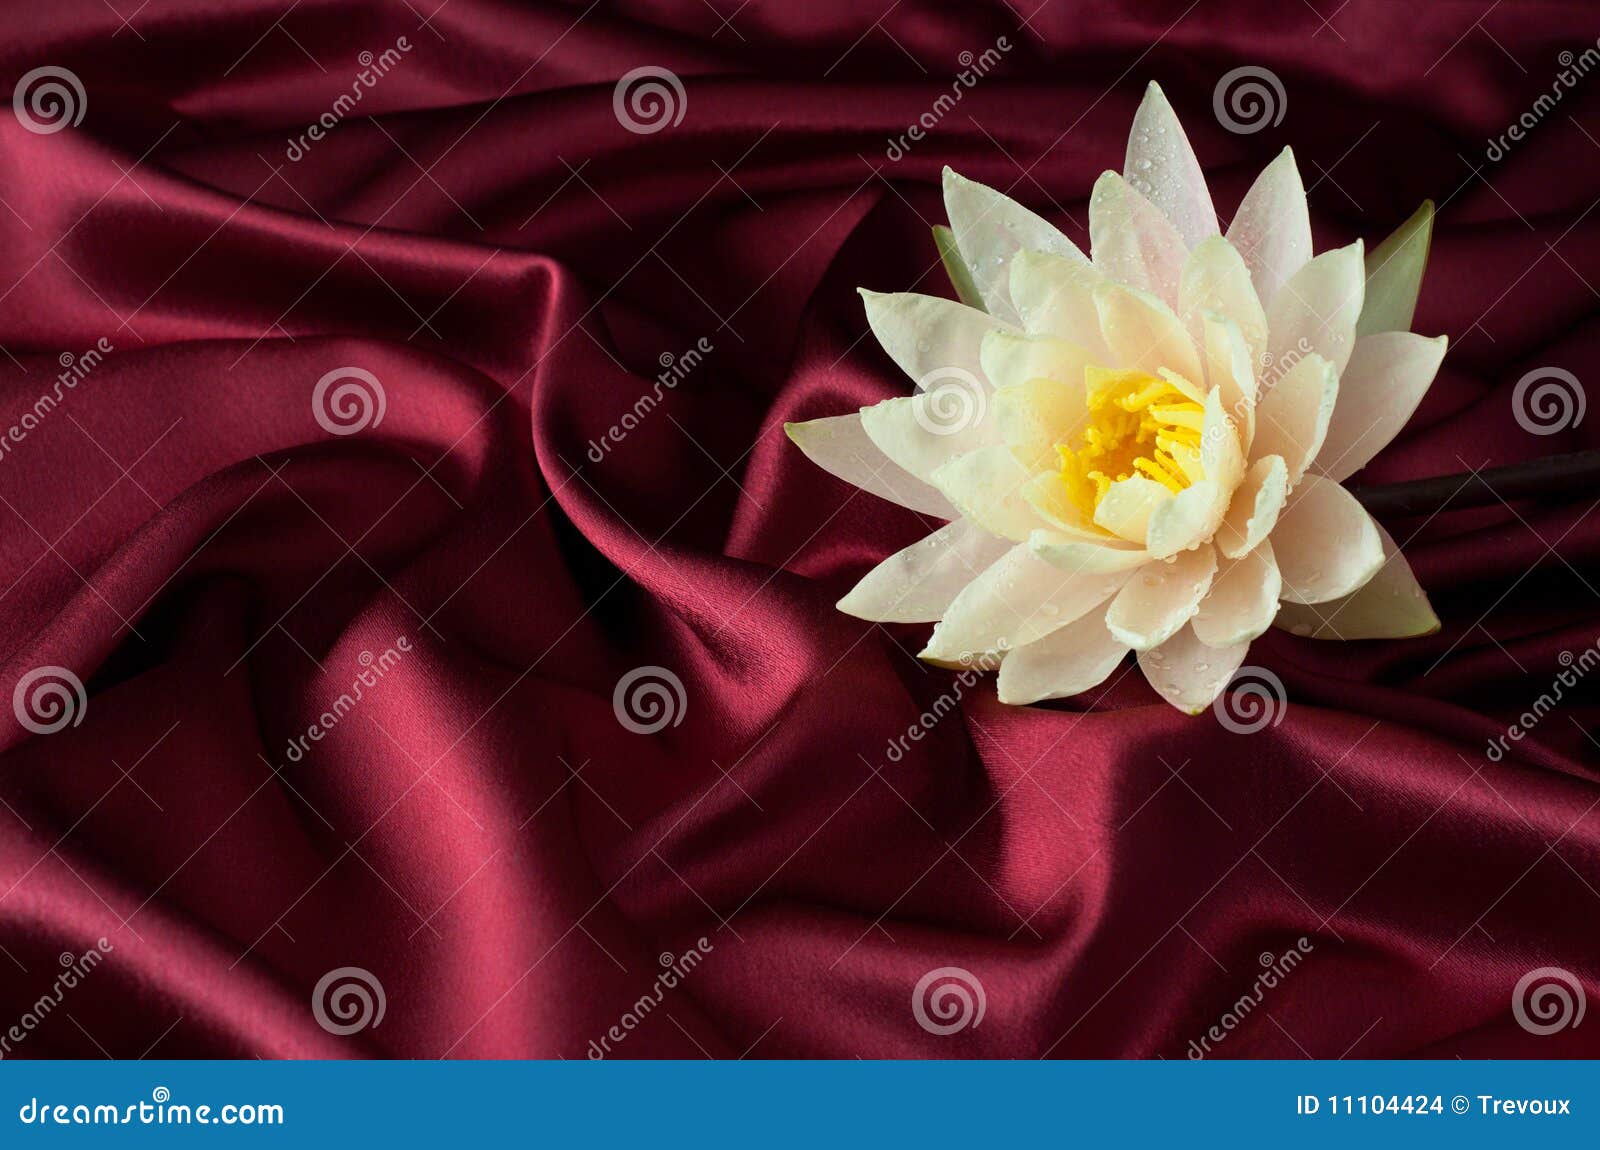 water lily on burgundy satin